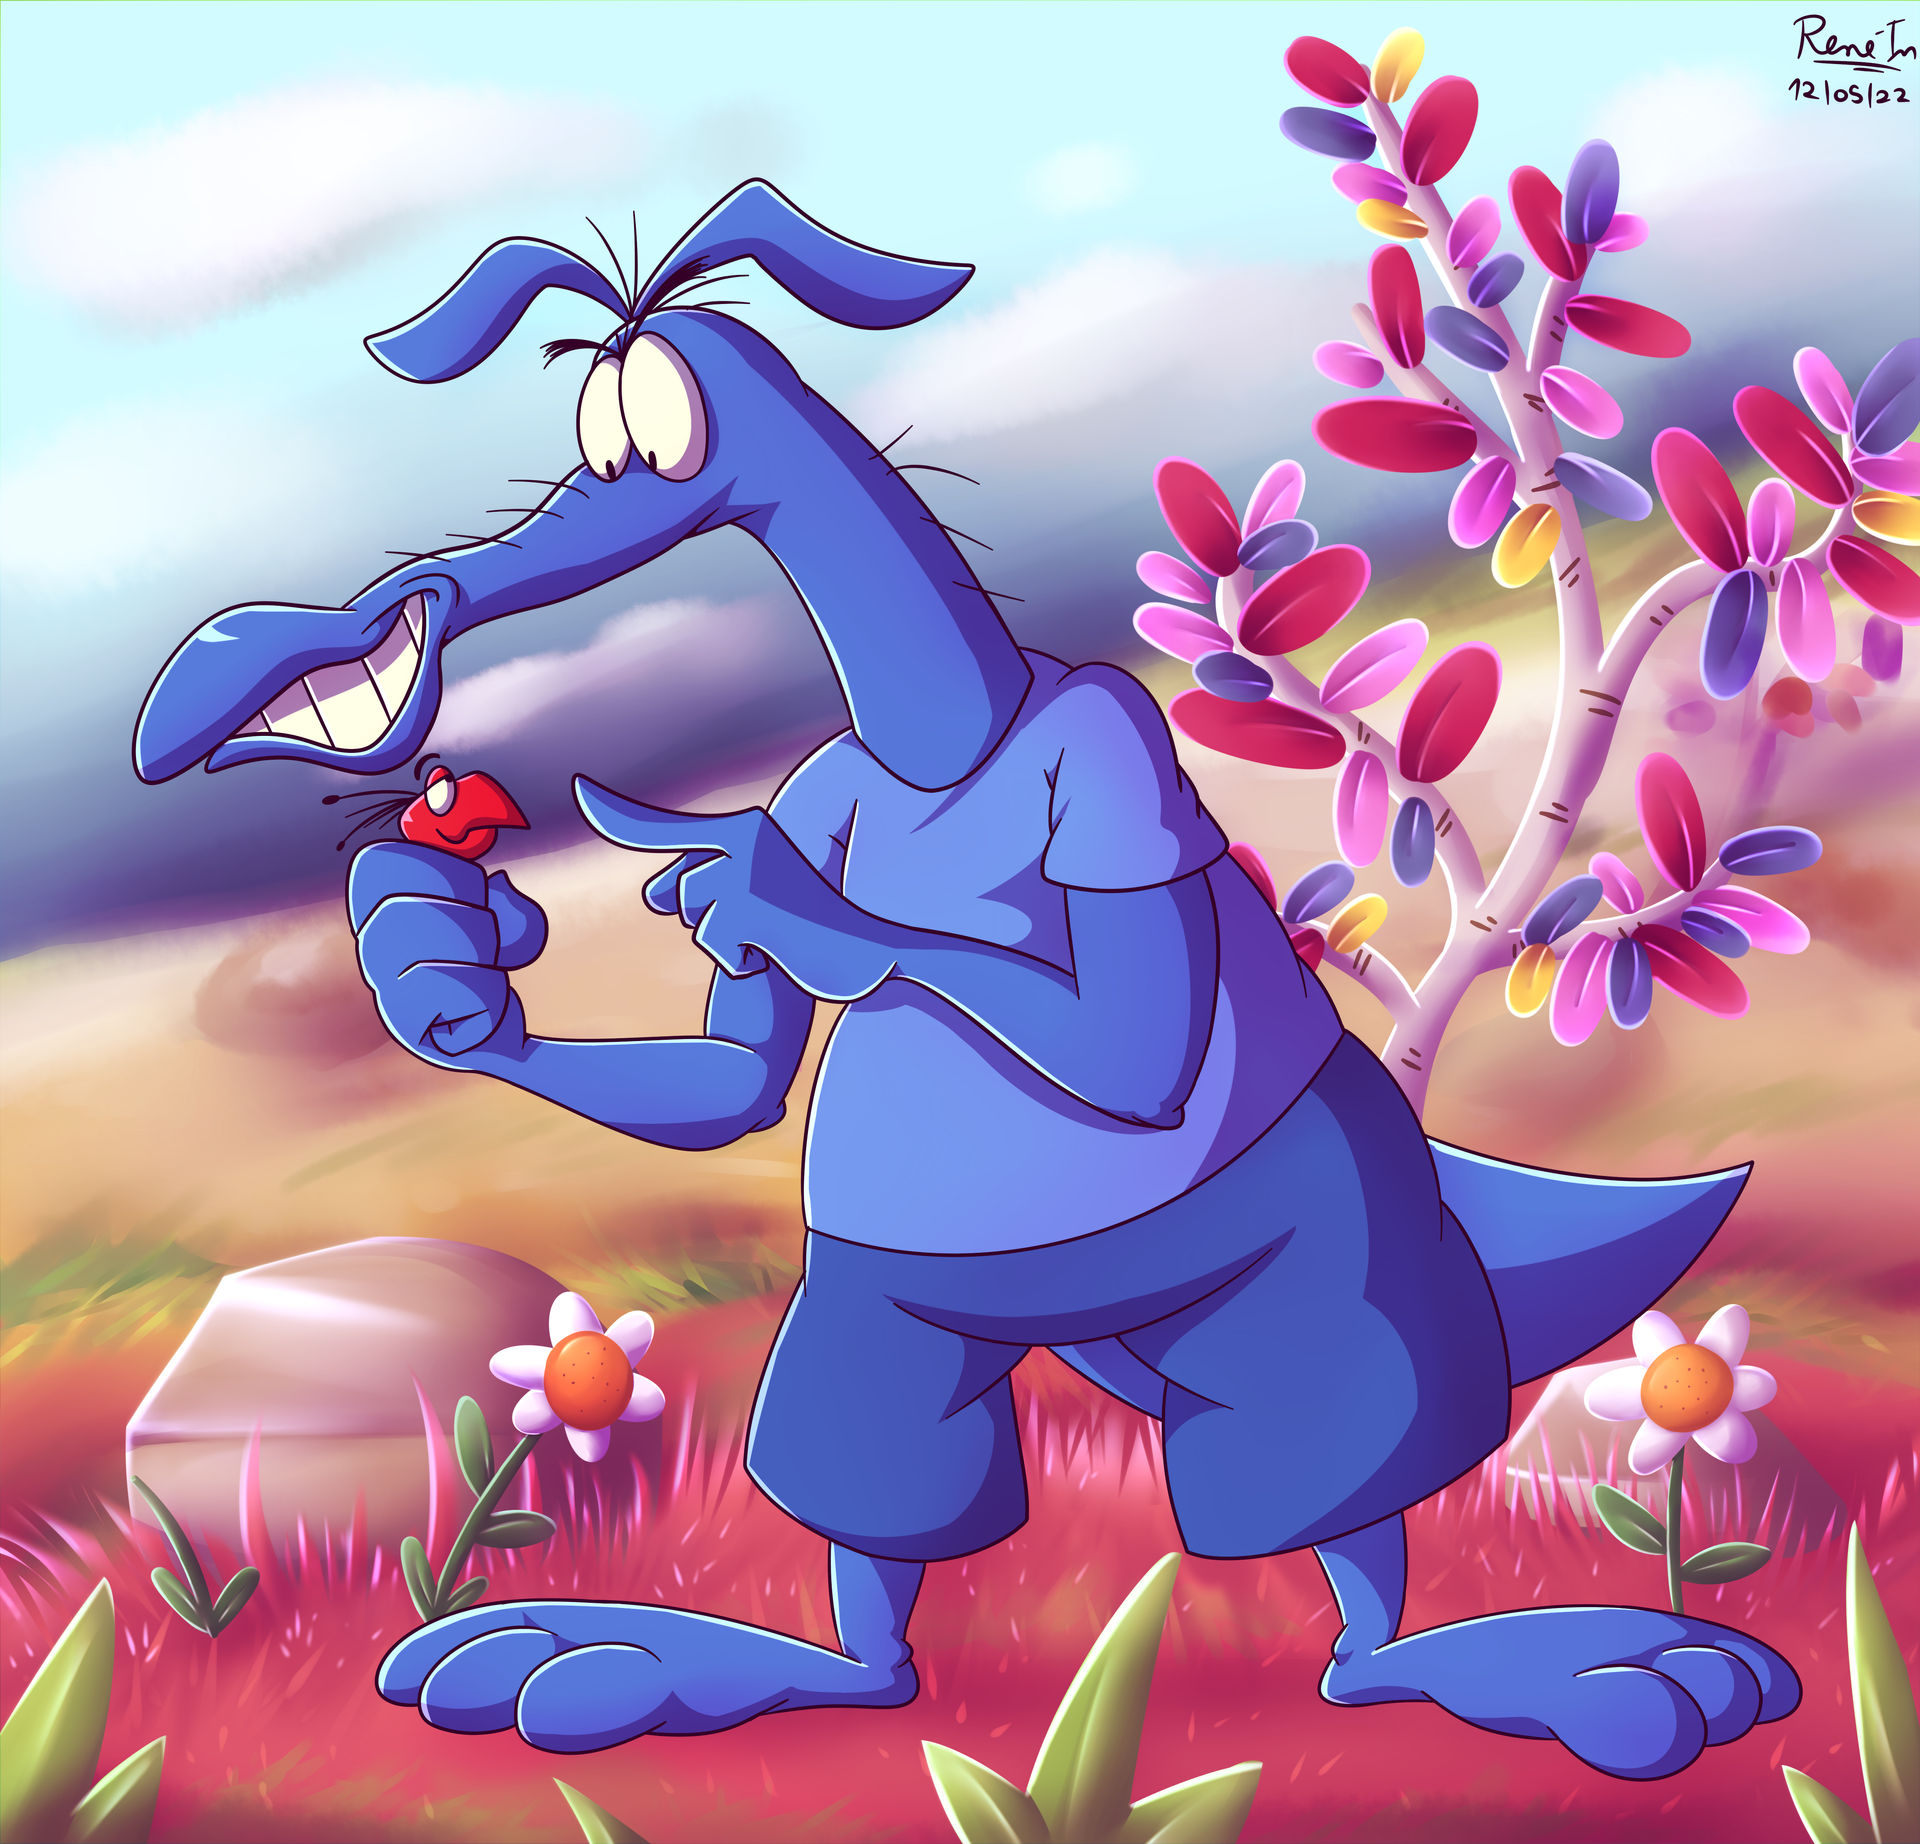 The Aardvark catches the Ant by Rennenne on DeviantArt